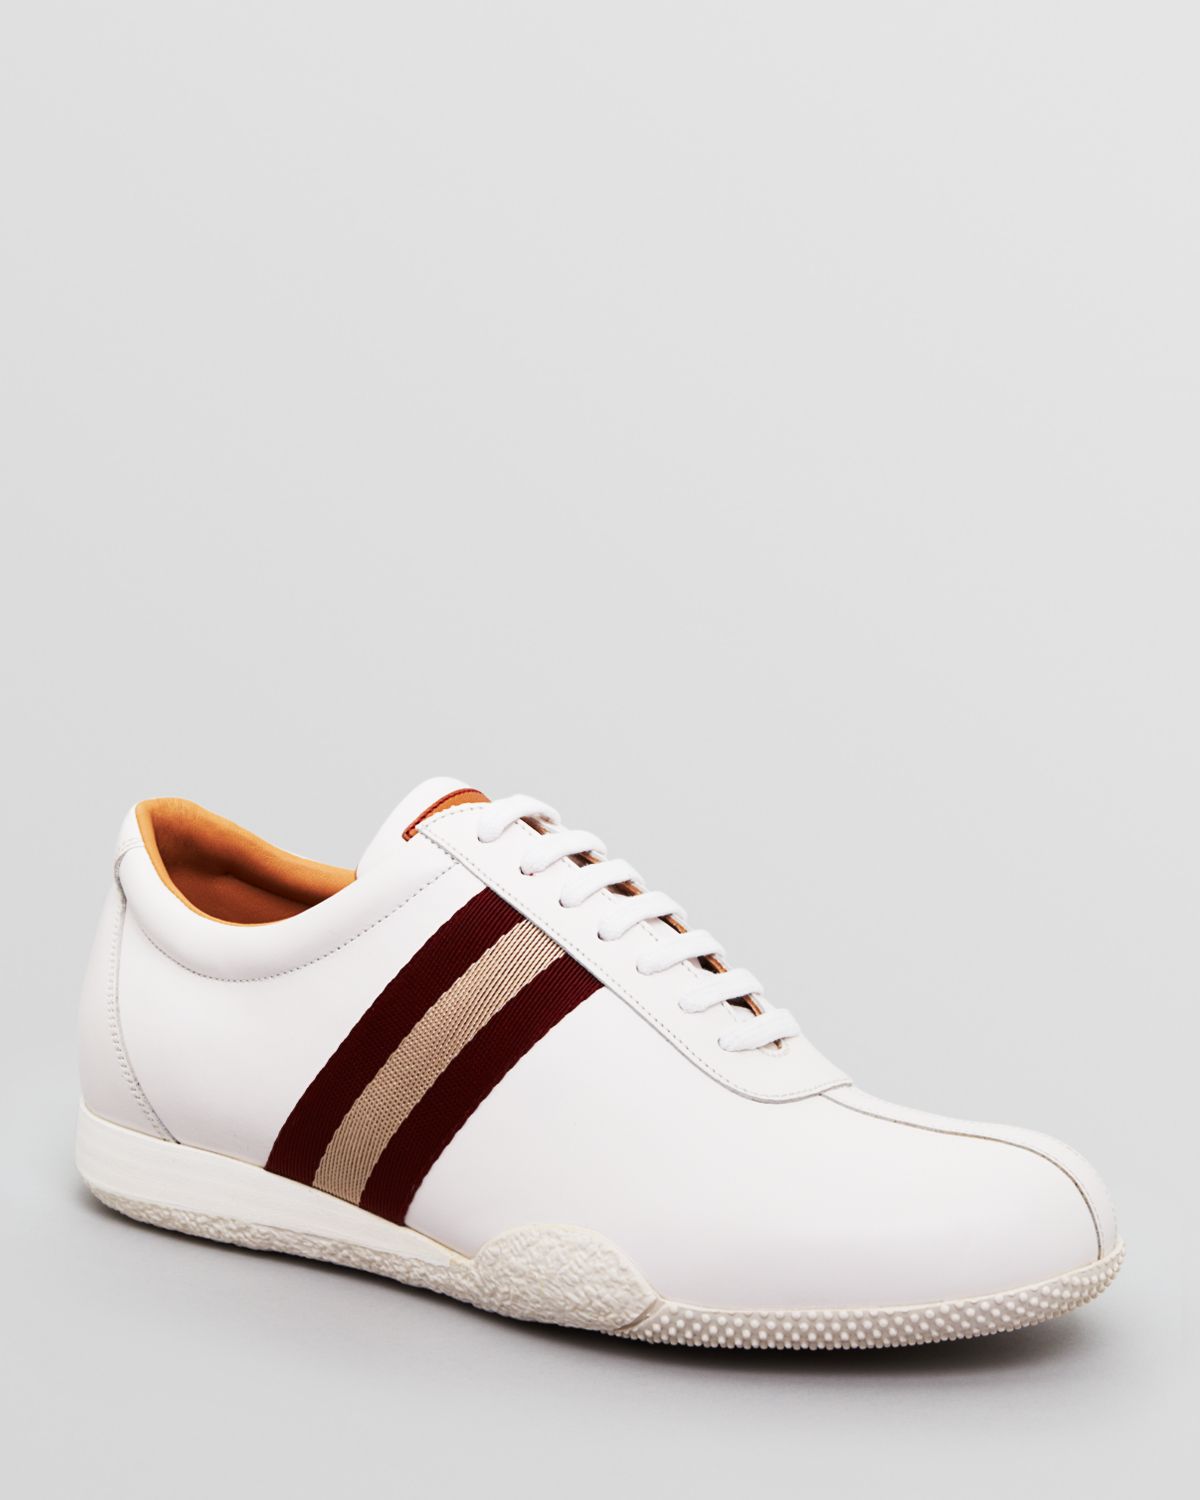 bally shoes for mens on sale